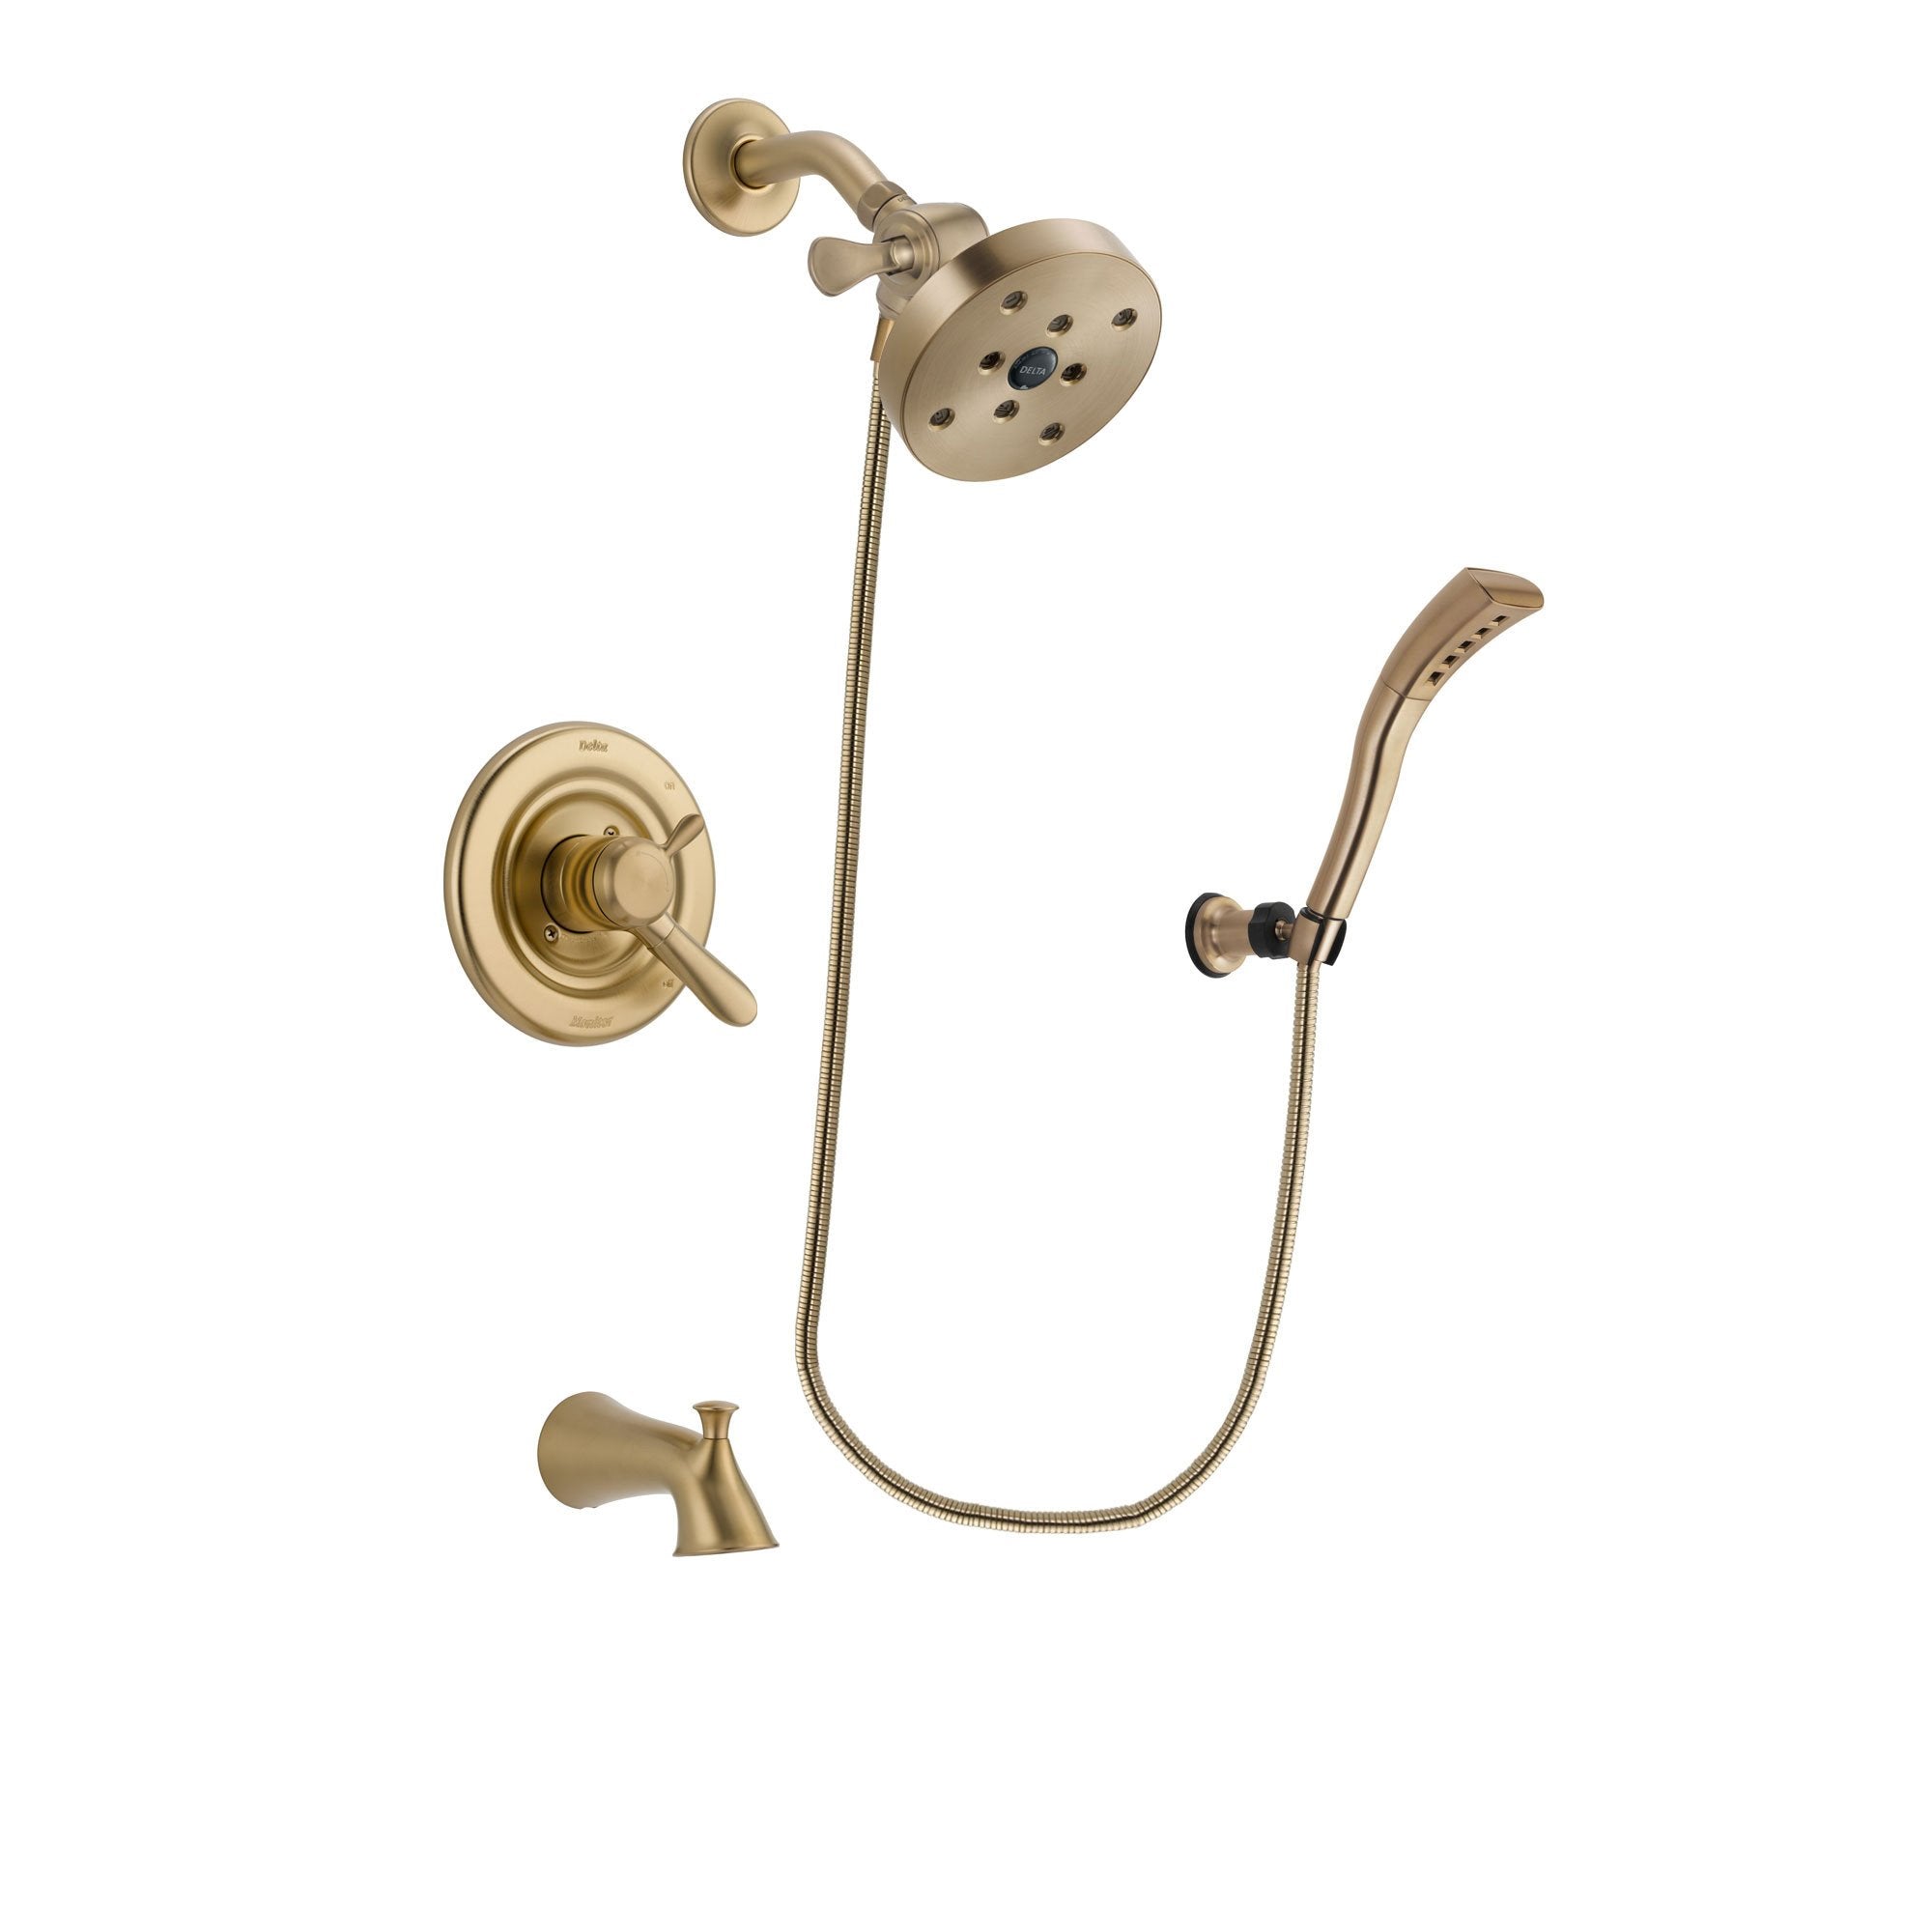 Delta Lahara Champagne Bronze Finish Dual Control Tub and Shower Faucet System Package with 5-1/2 inch Showerhead and Modern Wall Mount Personal Handheld Shower Spray Includes Rough-in Valve and Tub Spout DSP3723V